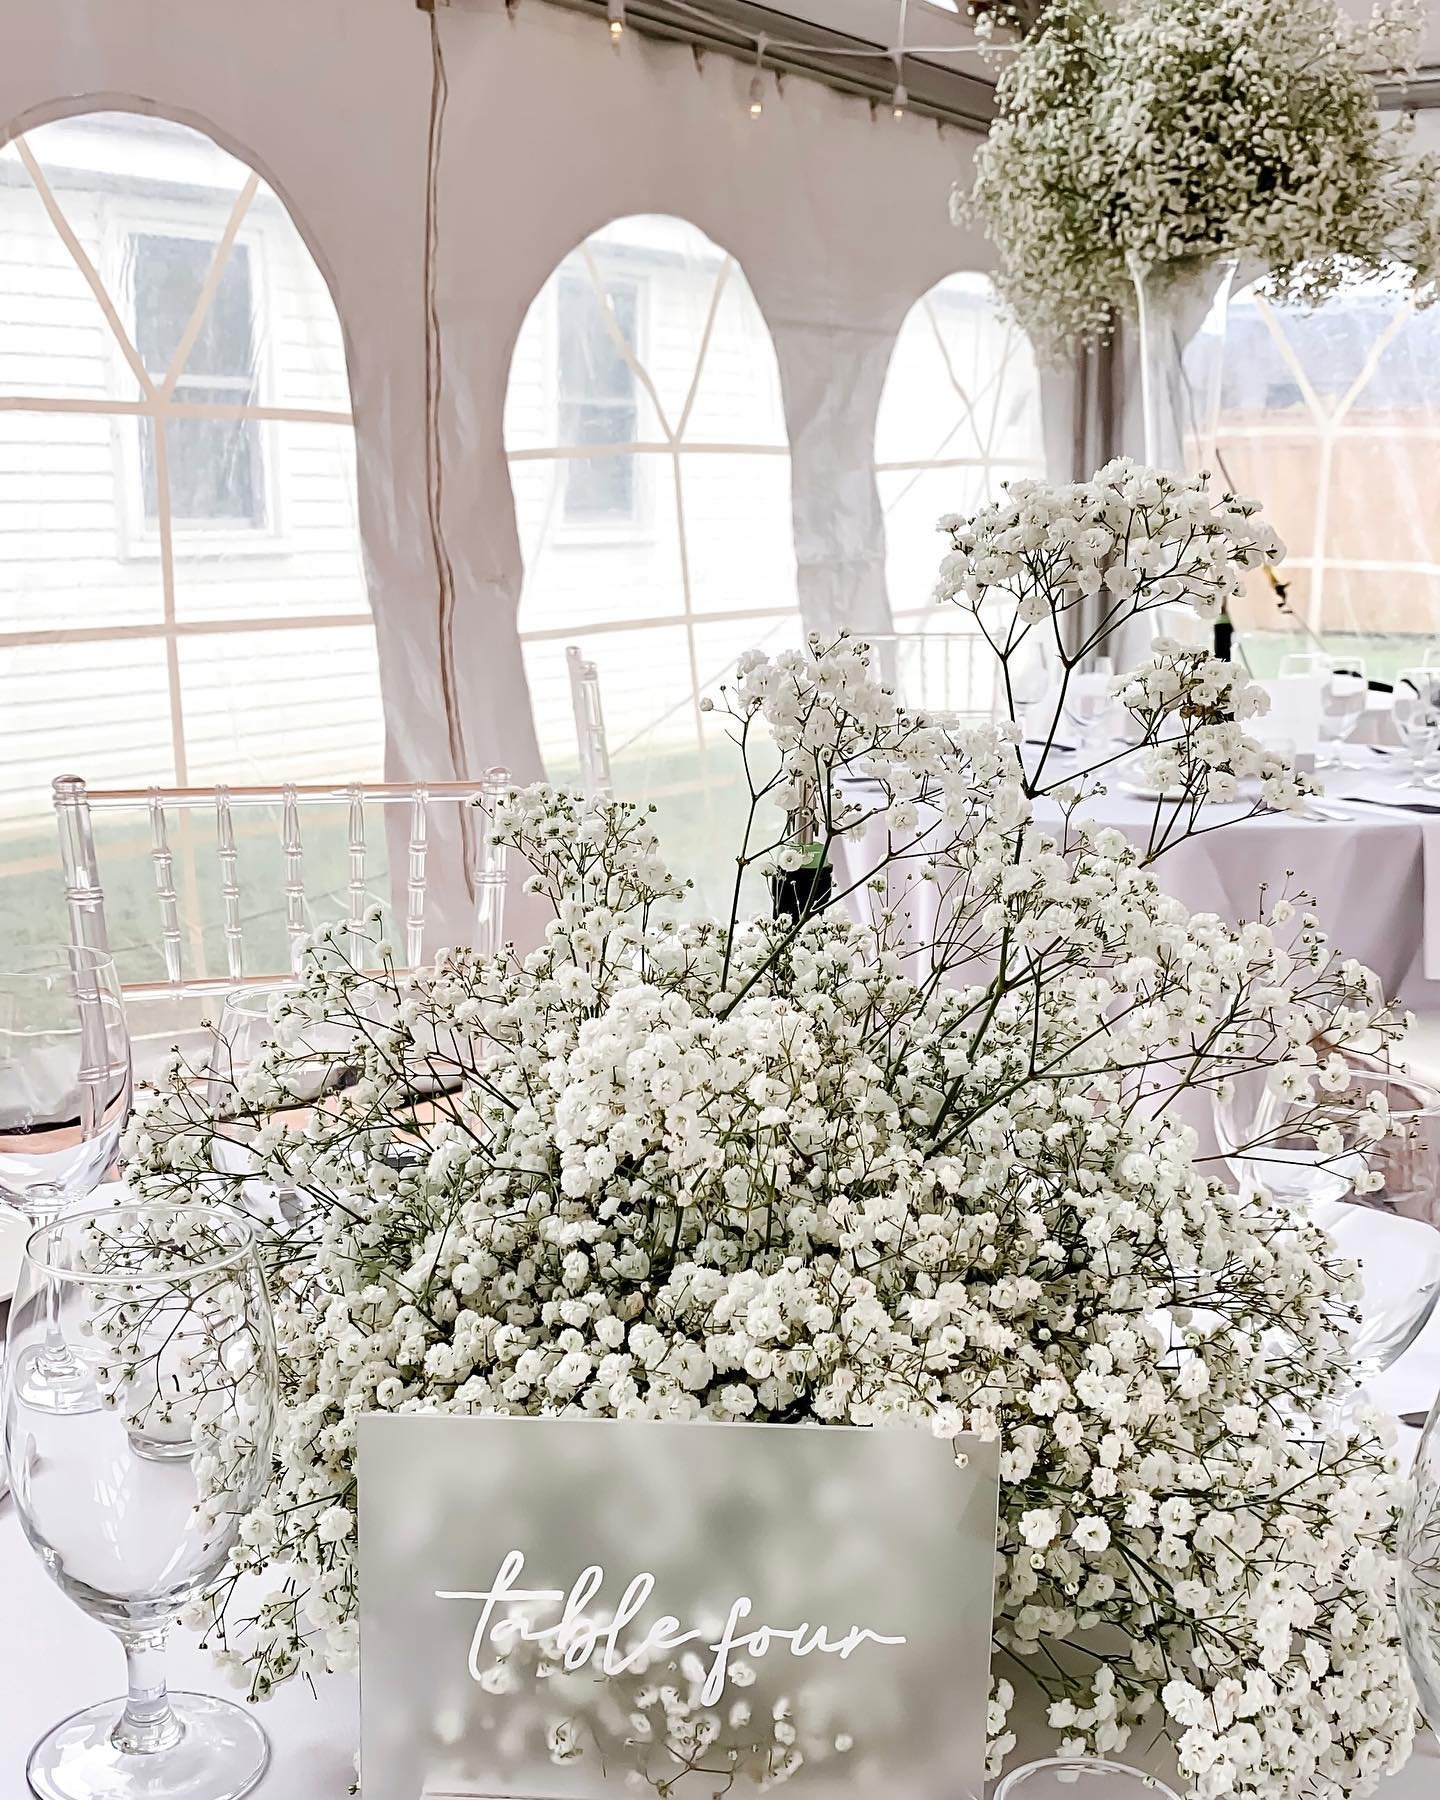 Baby&rsquo;s breath centrepieces ftw 🤍

We love an elegant yet classic modern look! Baby&rsquo;s breath is such a durable, versatile variety, that it truly takes your breath away 😉

There are so many ways to utilize baby&rsquo;s breath &amp; it&rsq